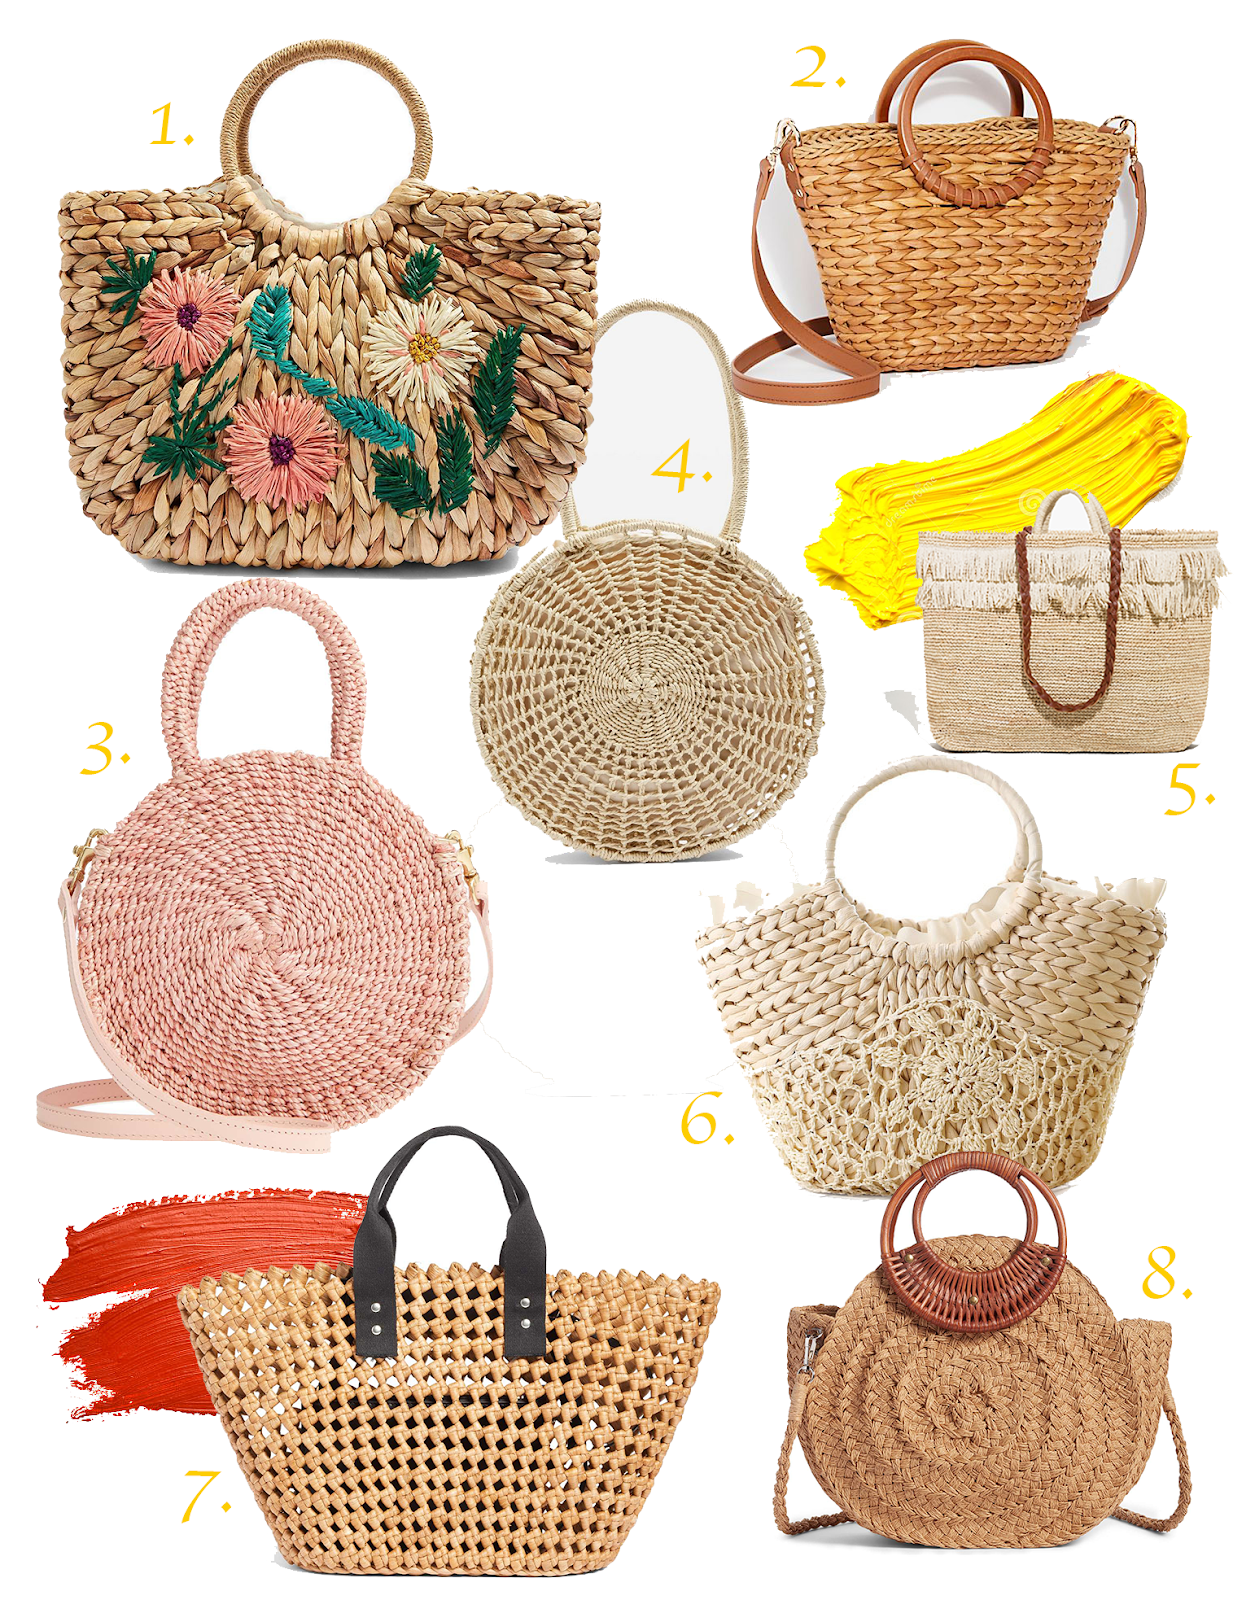 MUST-HAVE STRAW BAGS FOR SUMMER 2018 | Kristjaana